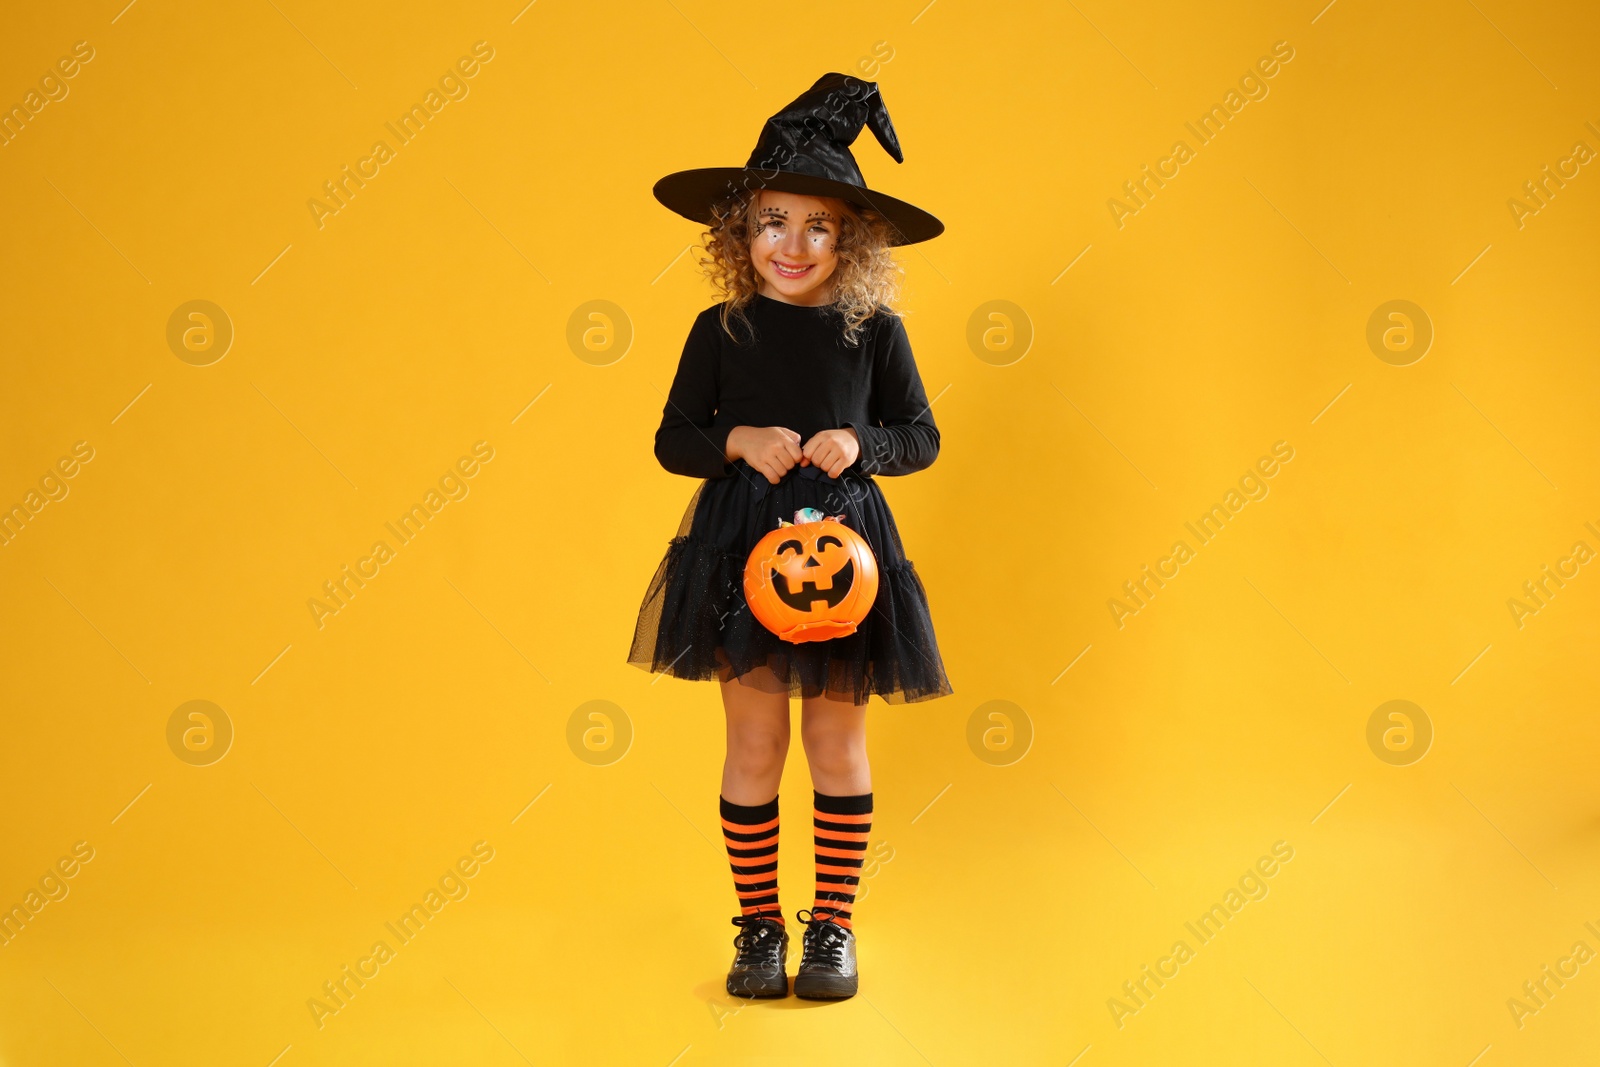 Photo of Cute little girl with pumpkin candy bucket wearing Halloween costume on yellow background